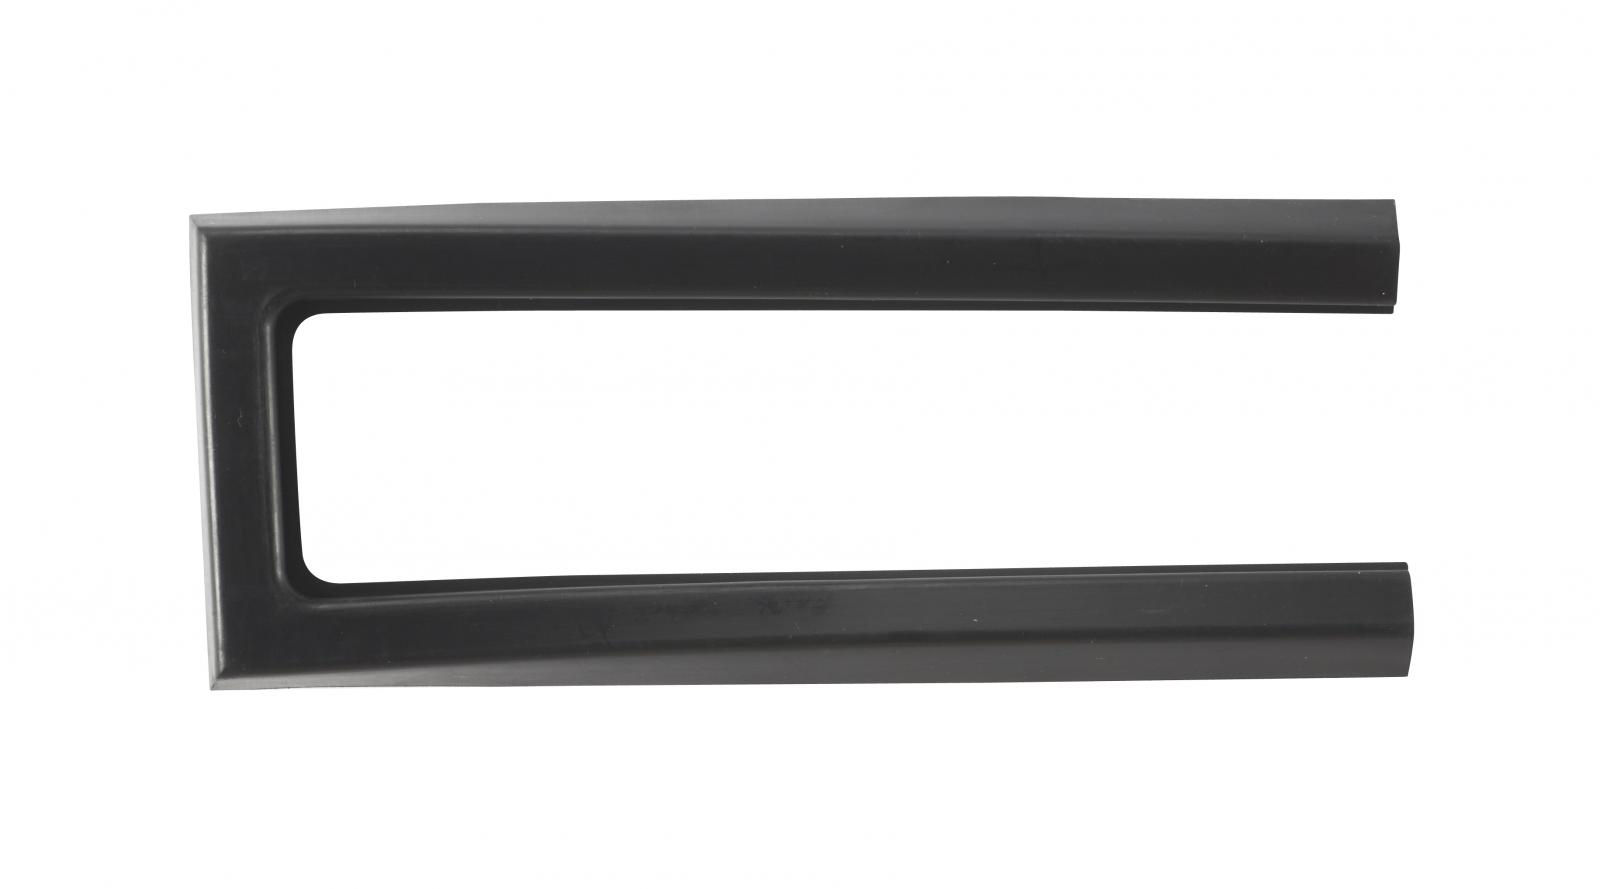 TapeTech® 8" Wiper. Part number 350008